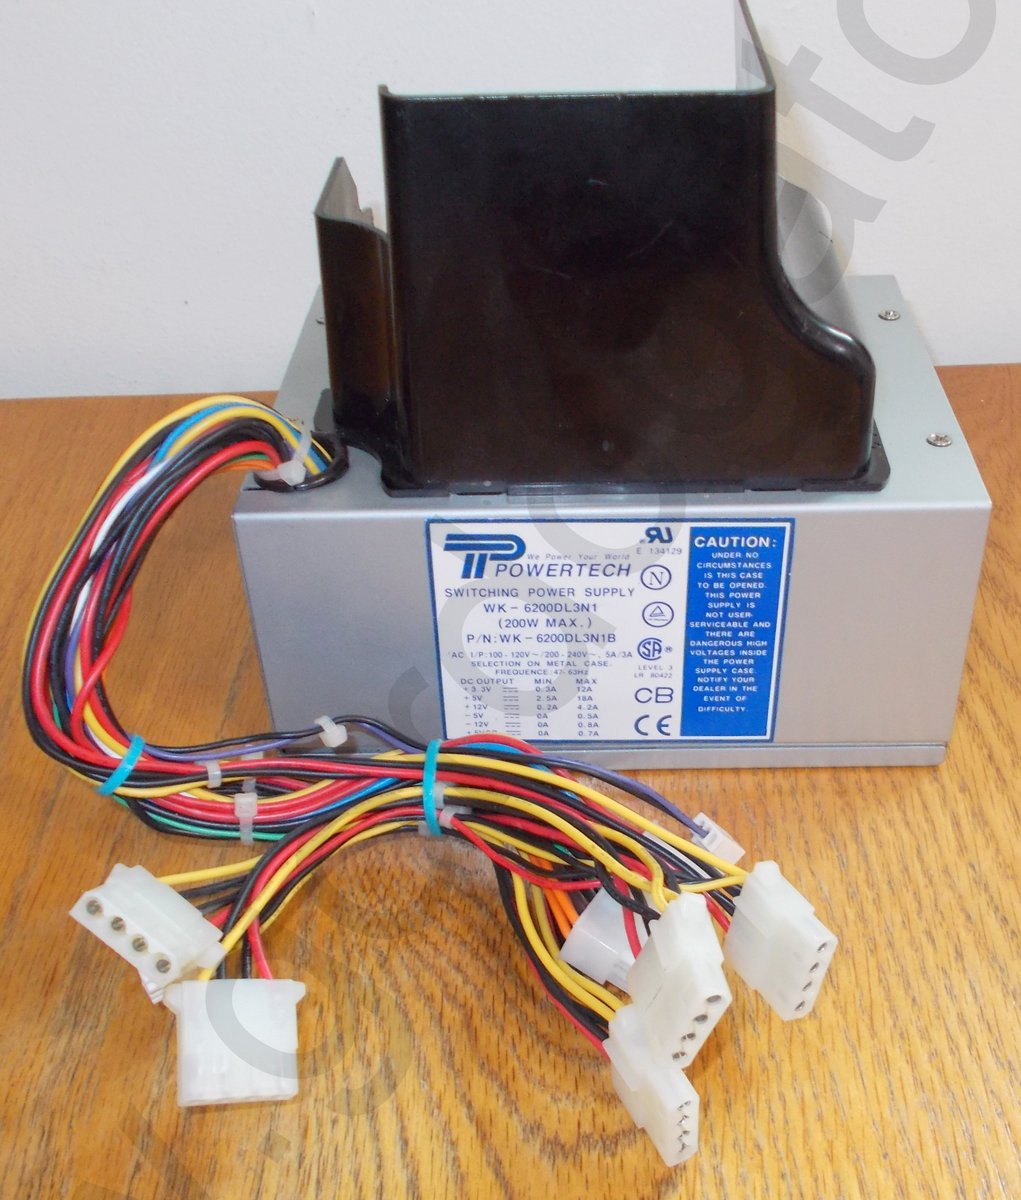 PowerTech WK-6200DL3N1 Switching Power Supply for Parts/Repair